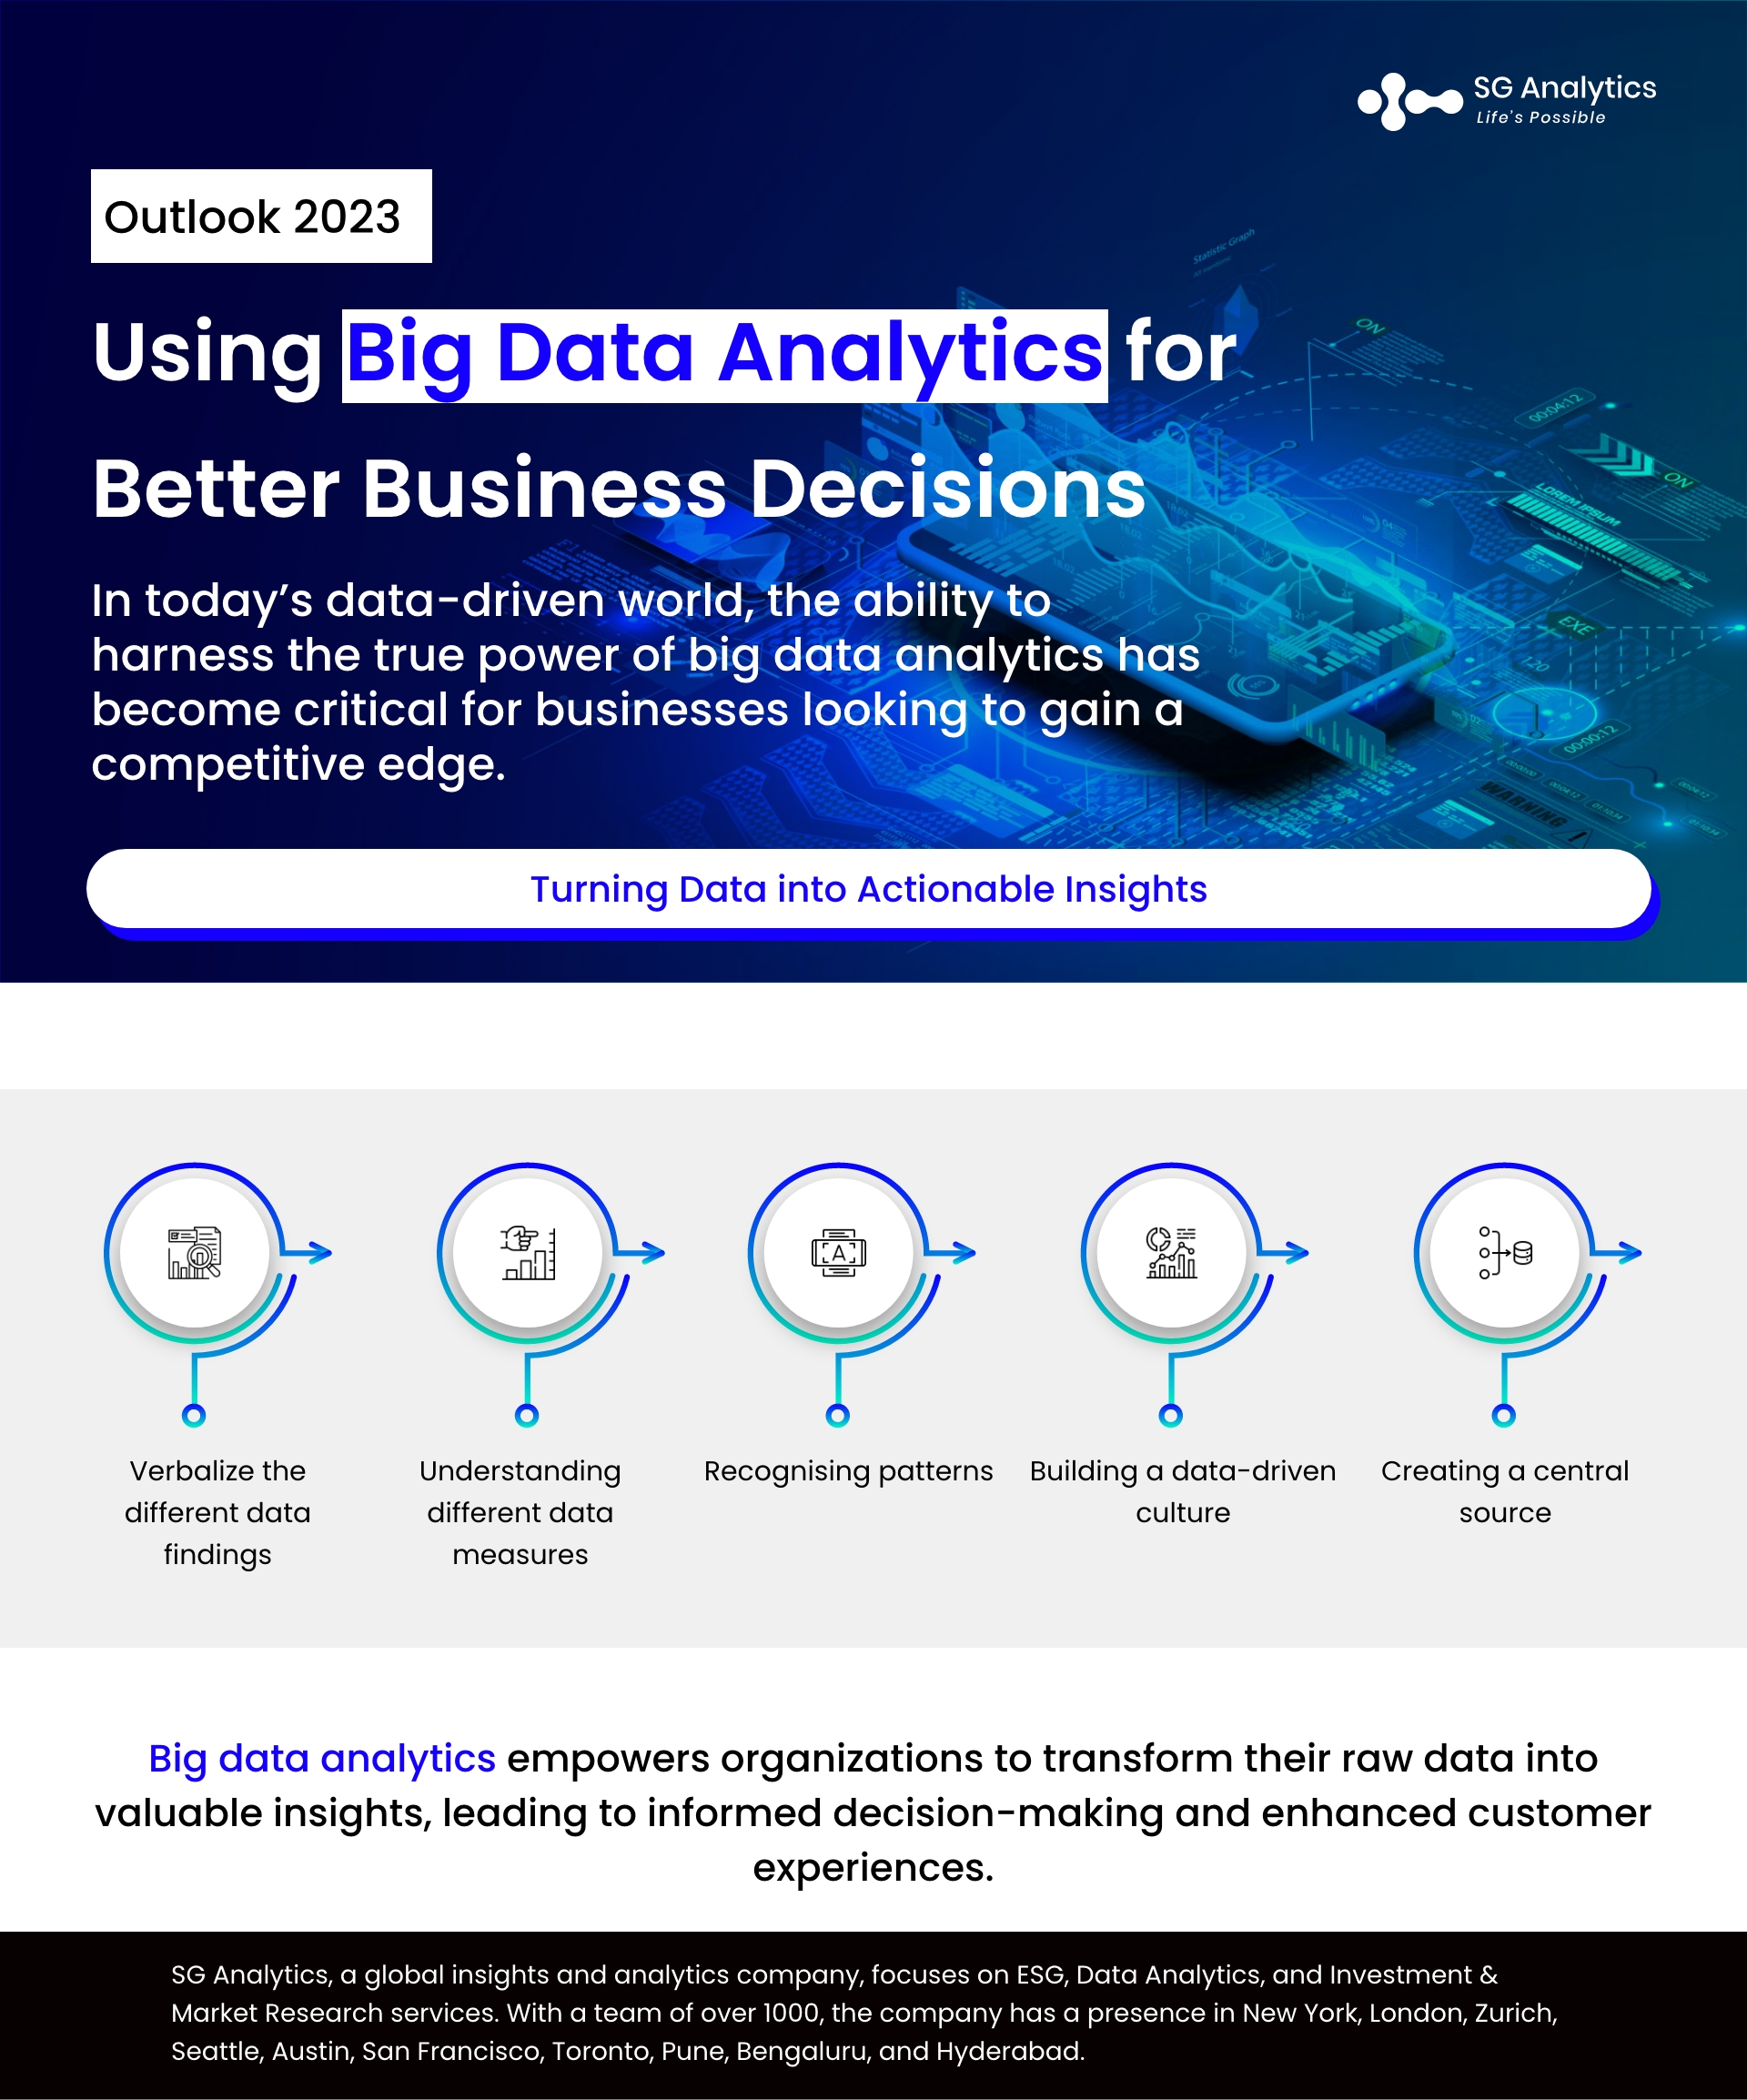 Using Big Data Analytics for Better Business Decisions